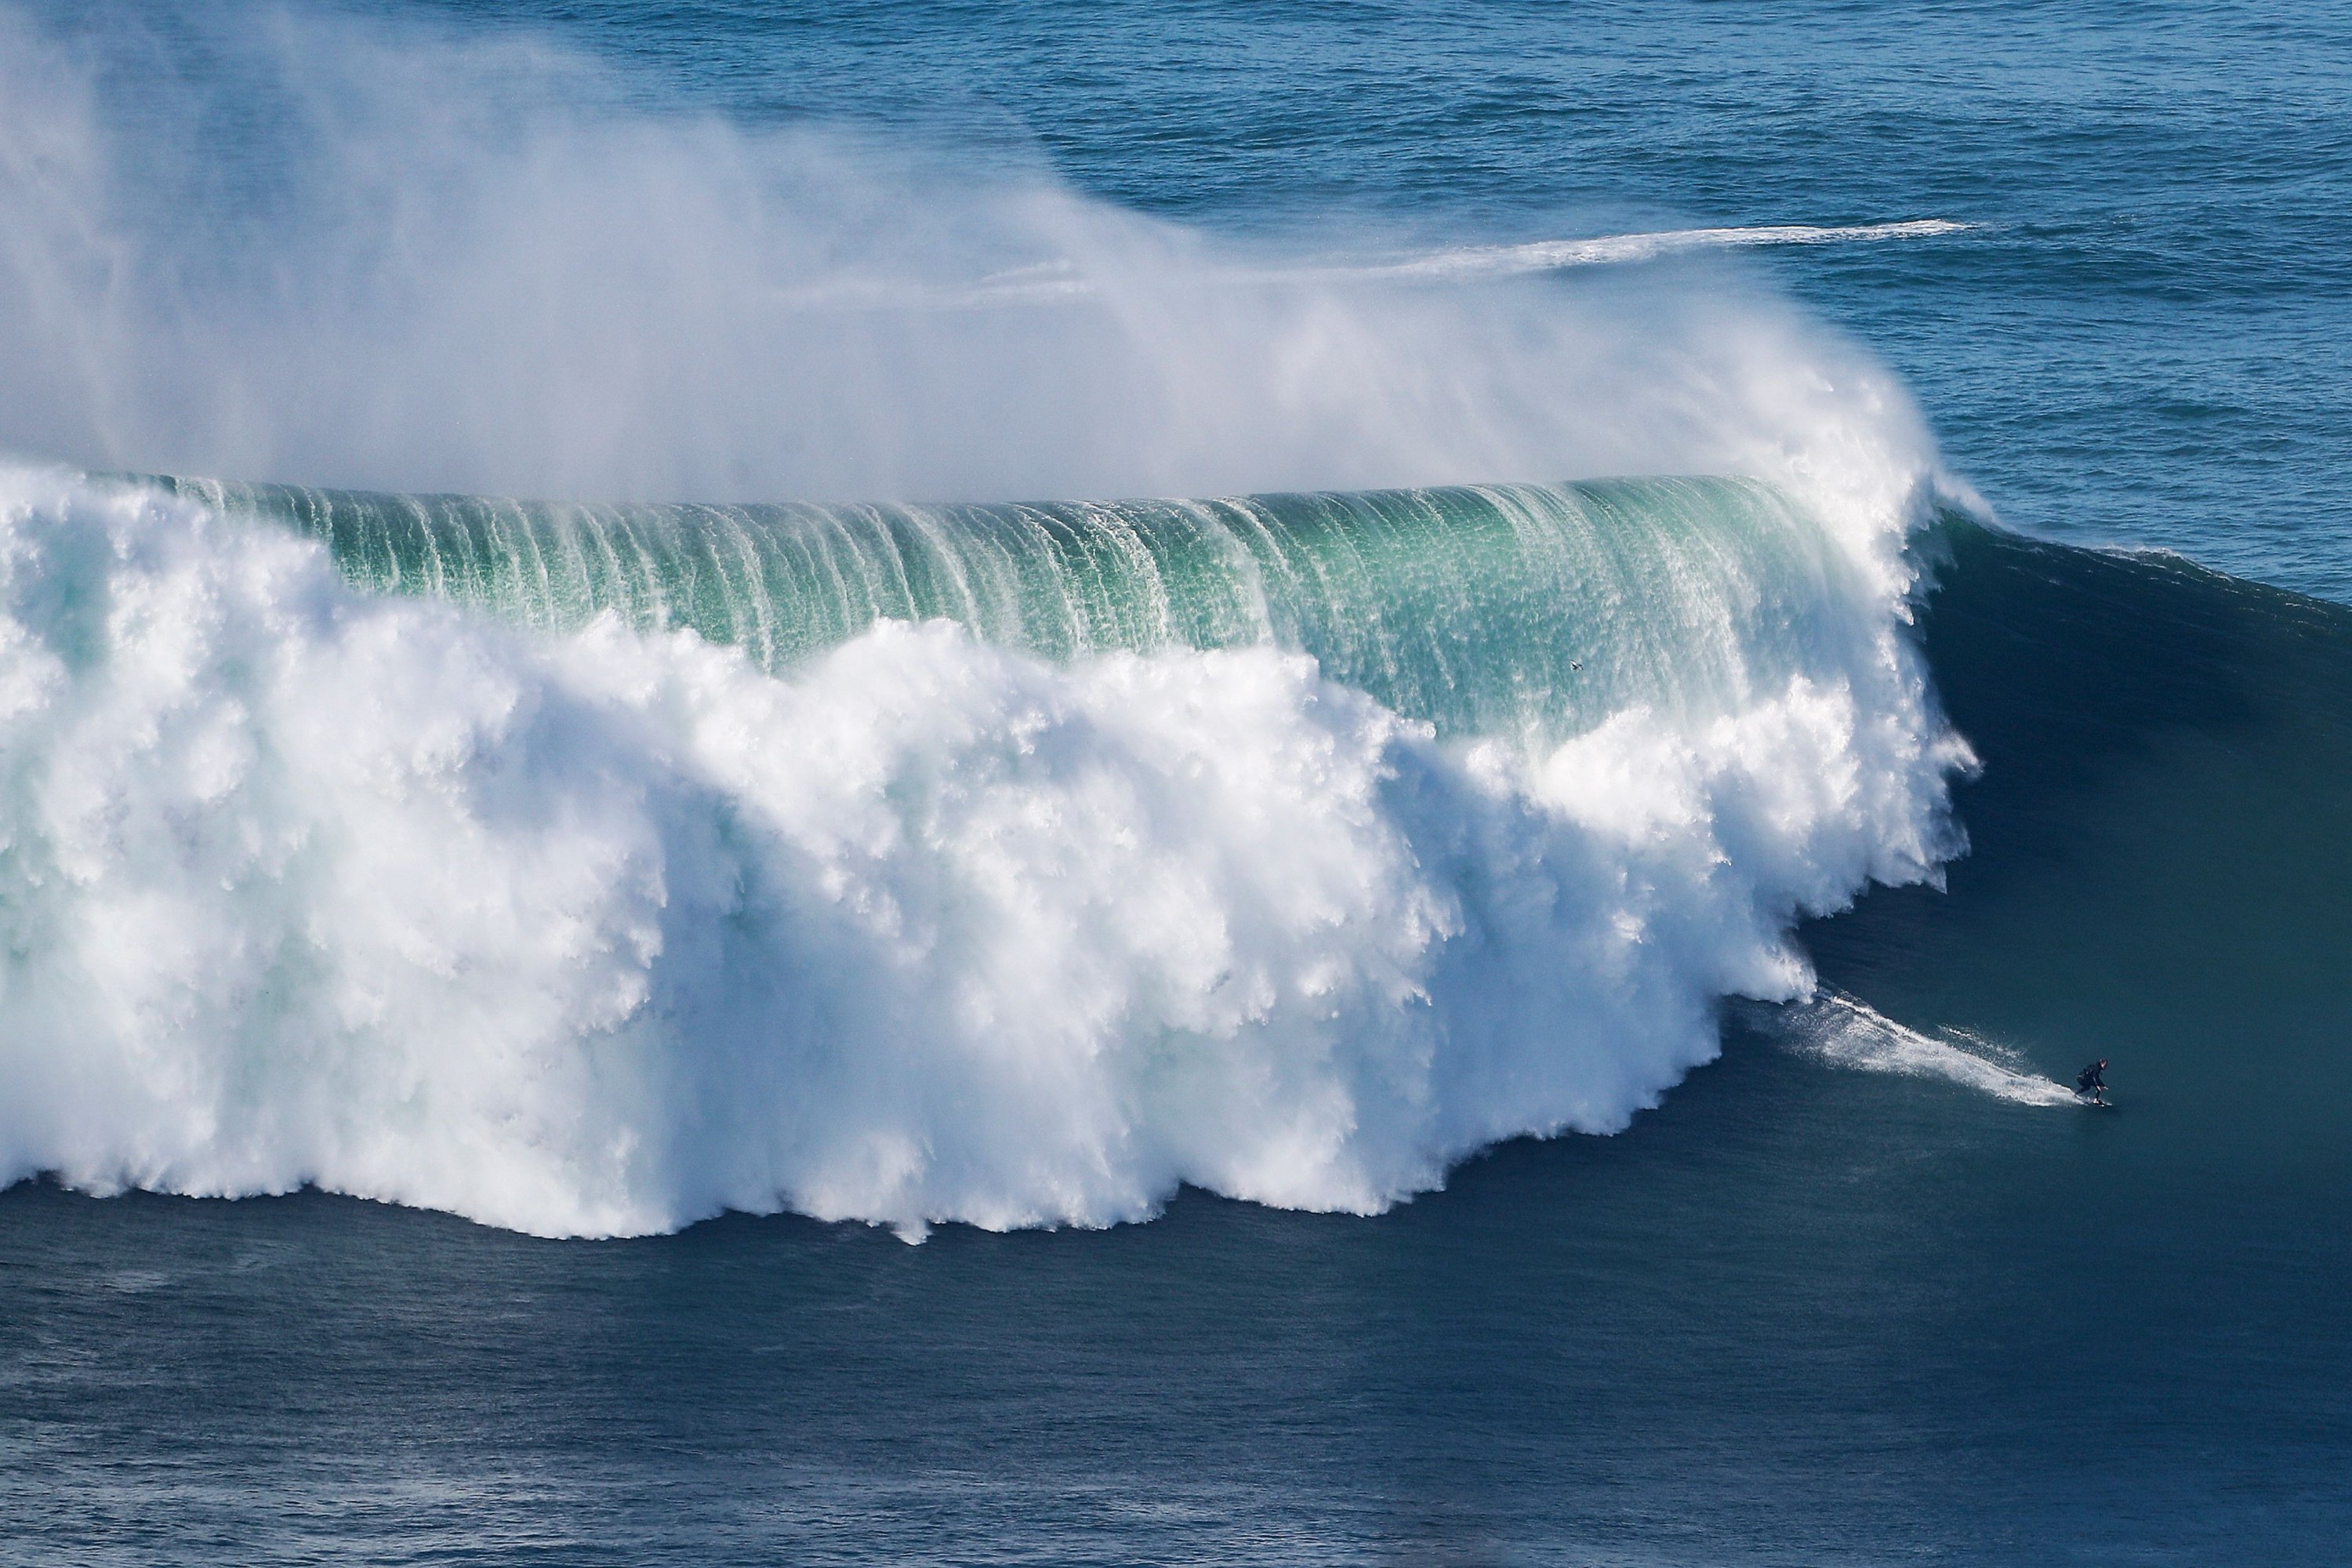 Hurricane-generated swell draws big wave surfers to Portugal's Nazare